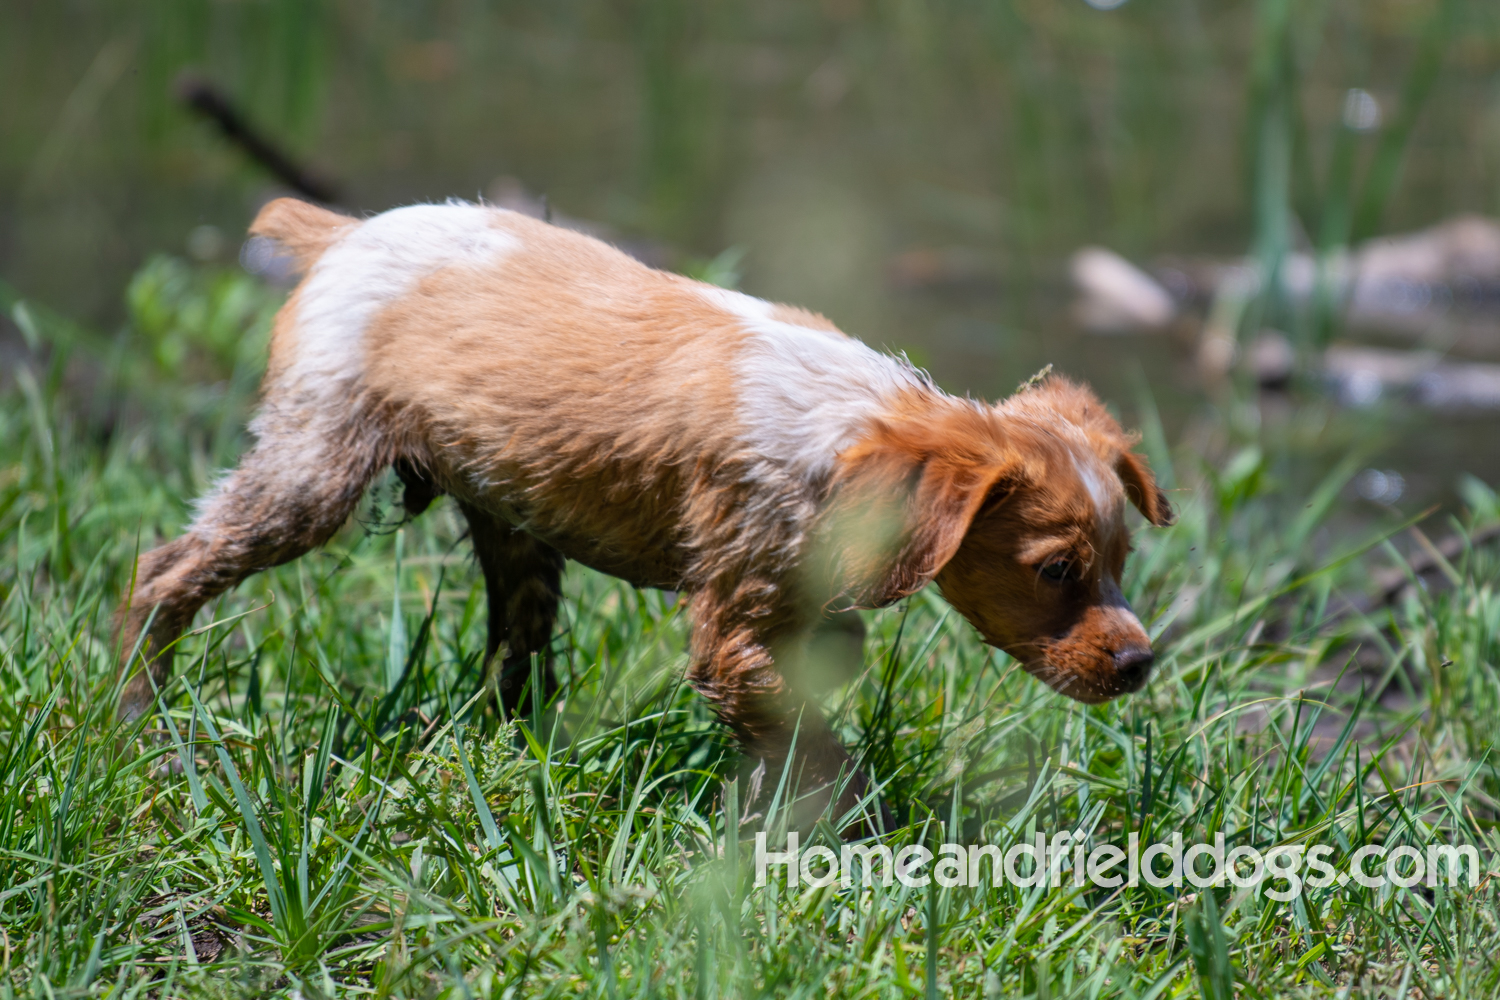 Pictures of French Brittany puppies for sale playing at the lake and catching fish